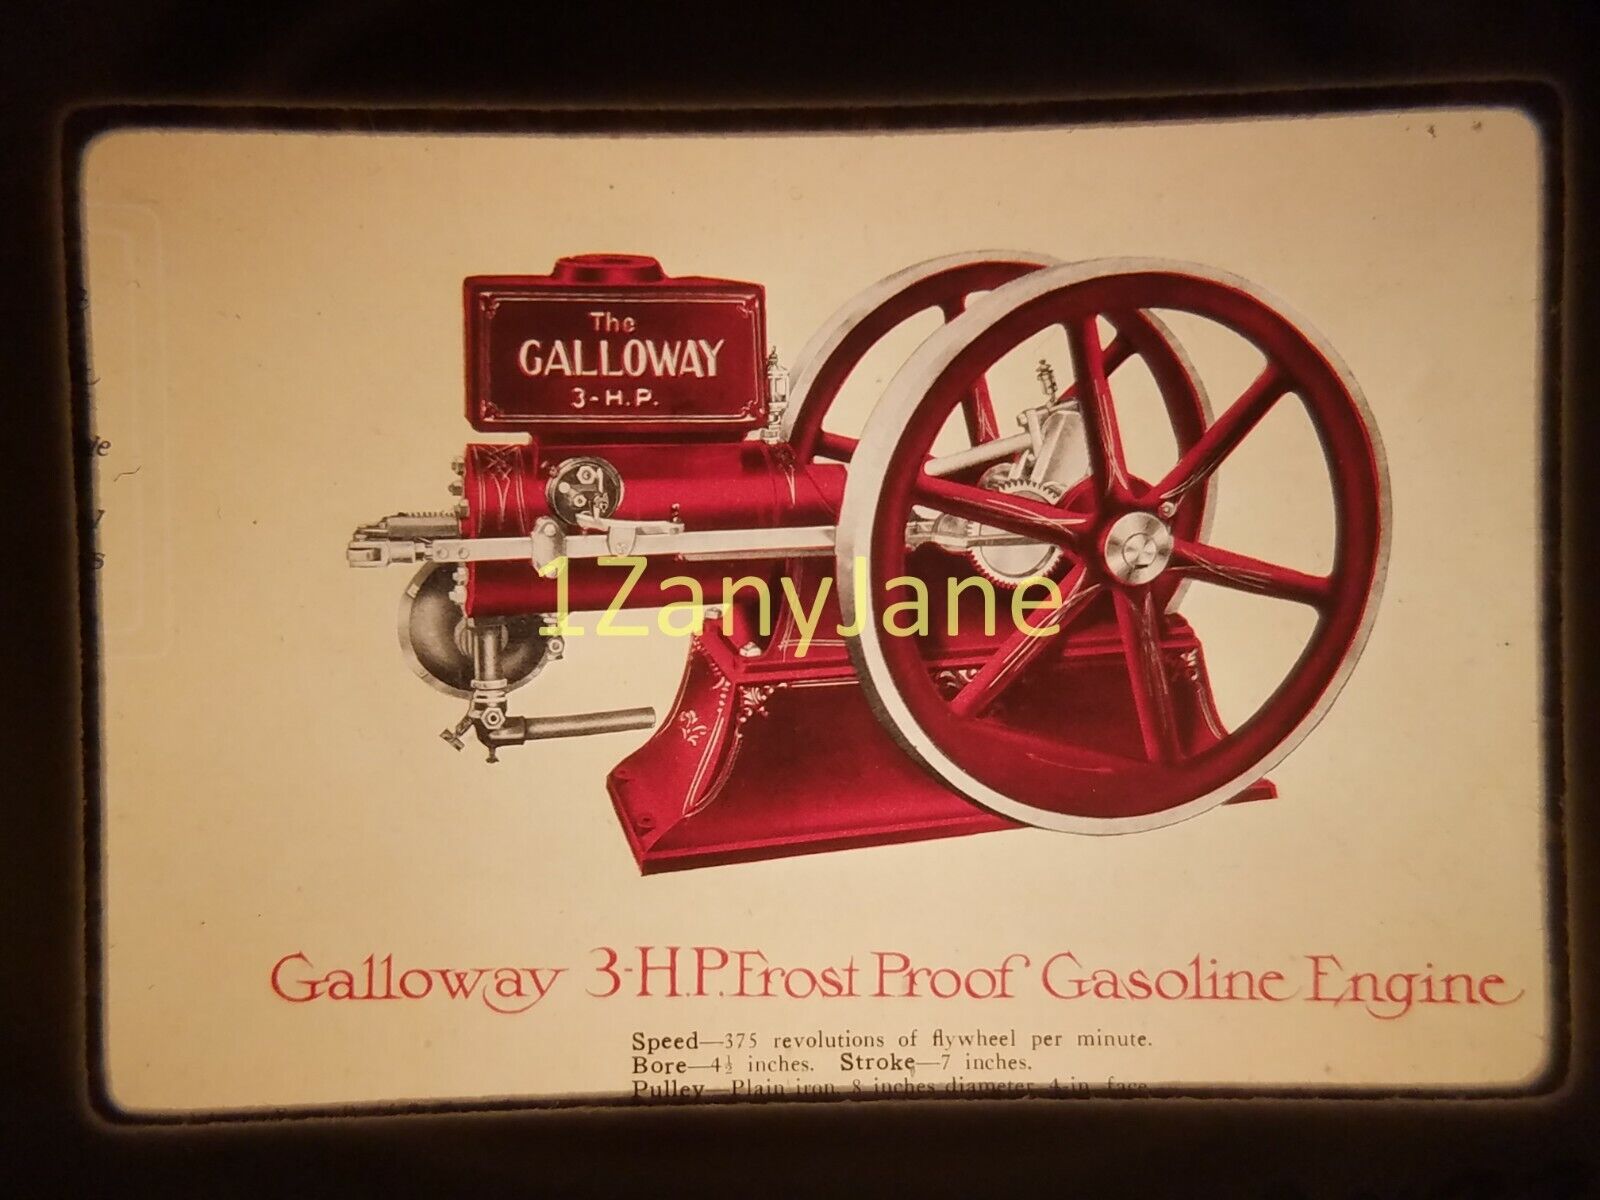 AC2308 35mm Slide of an Allis-Chalmers  from MEDIA ARCHIVES GALLOWAY 3HP ENGINE